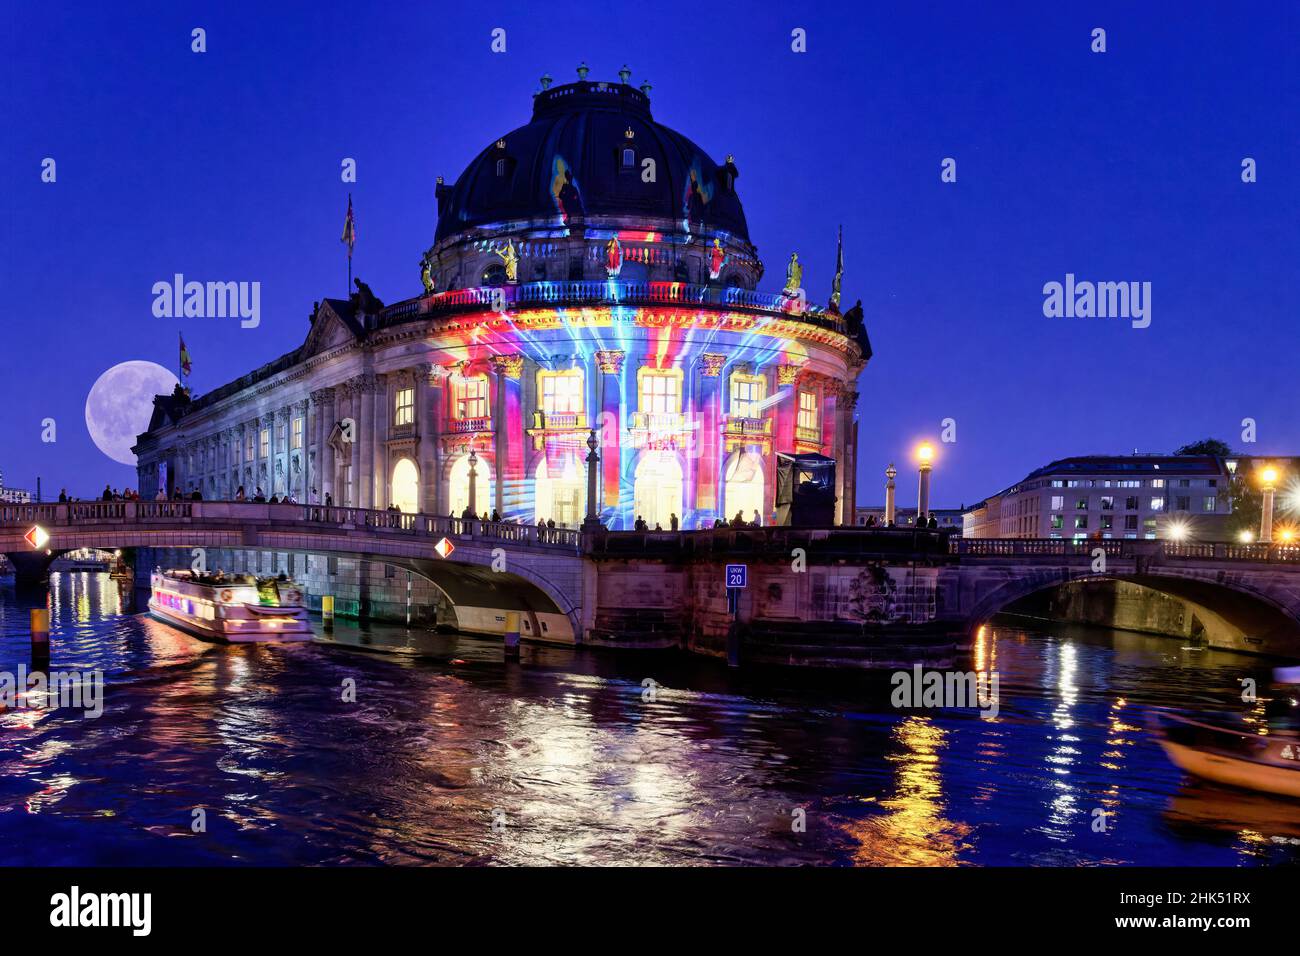 Bode Museum during the Festival of Lights, Museum Island, UNESCO World Heritage Site, Berlin Mitte district, Berlin, Germany, Europe Stock Photo